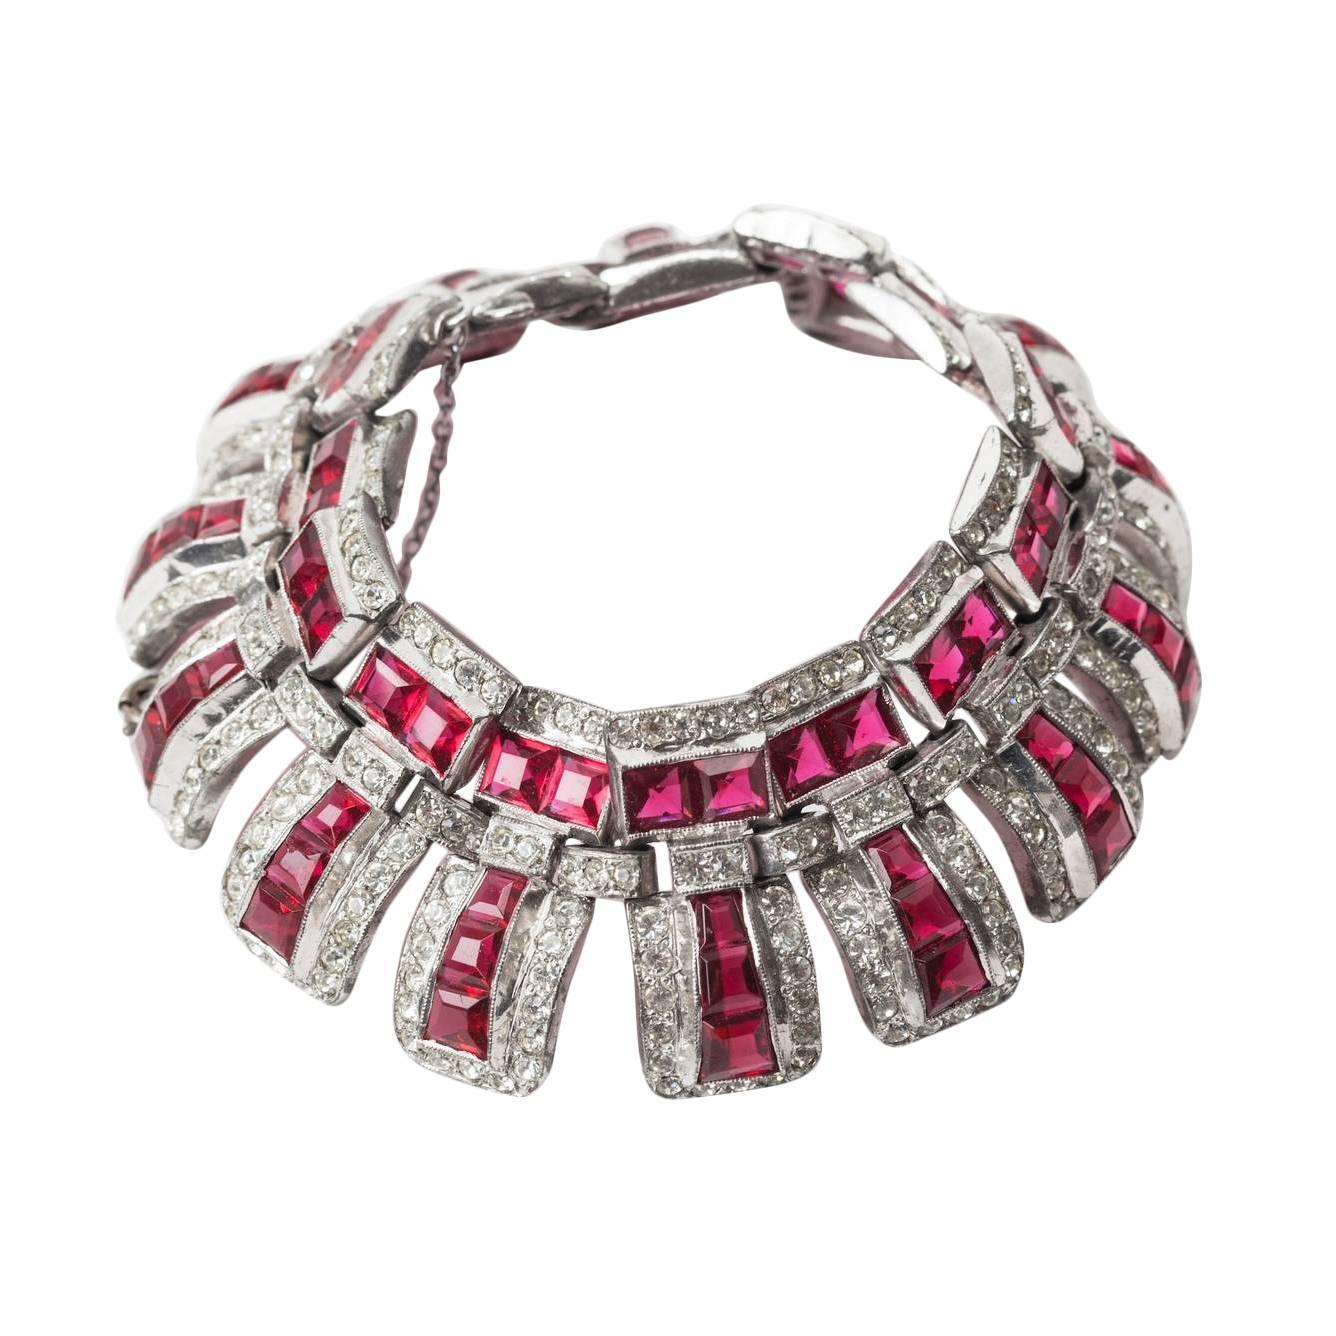 Articulated Art Deco Faux Ruby Bracelet For Sale at 1stdibs